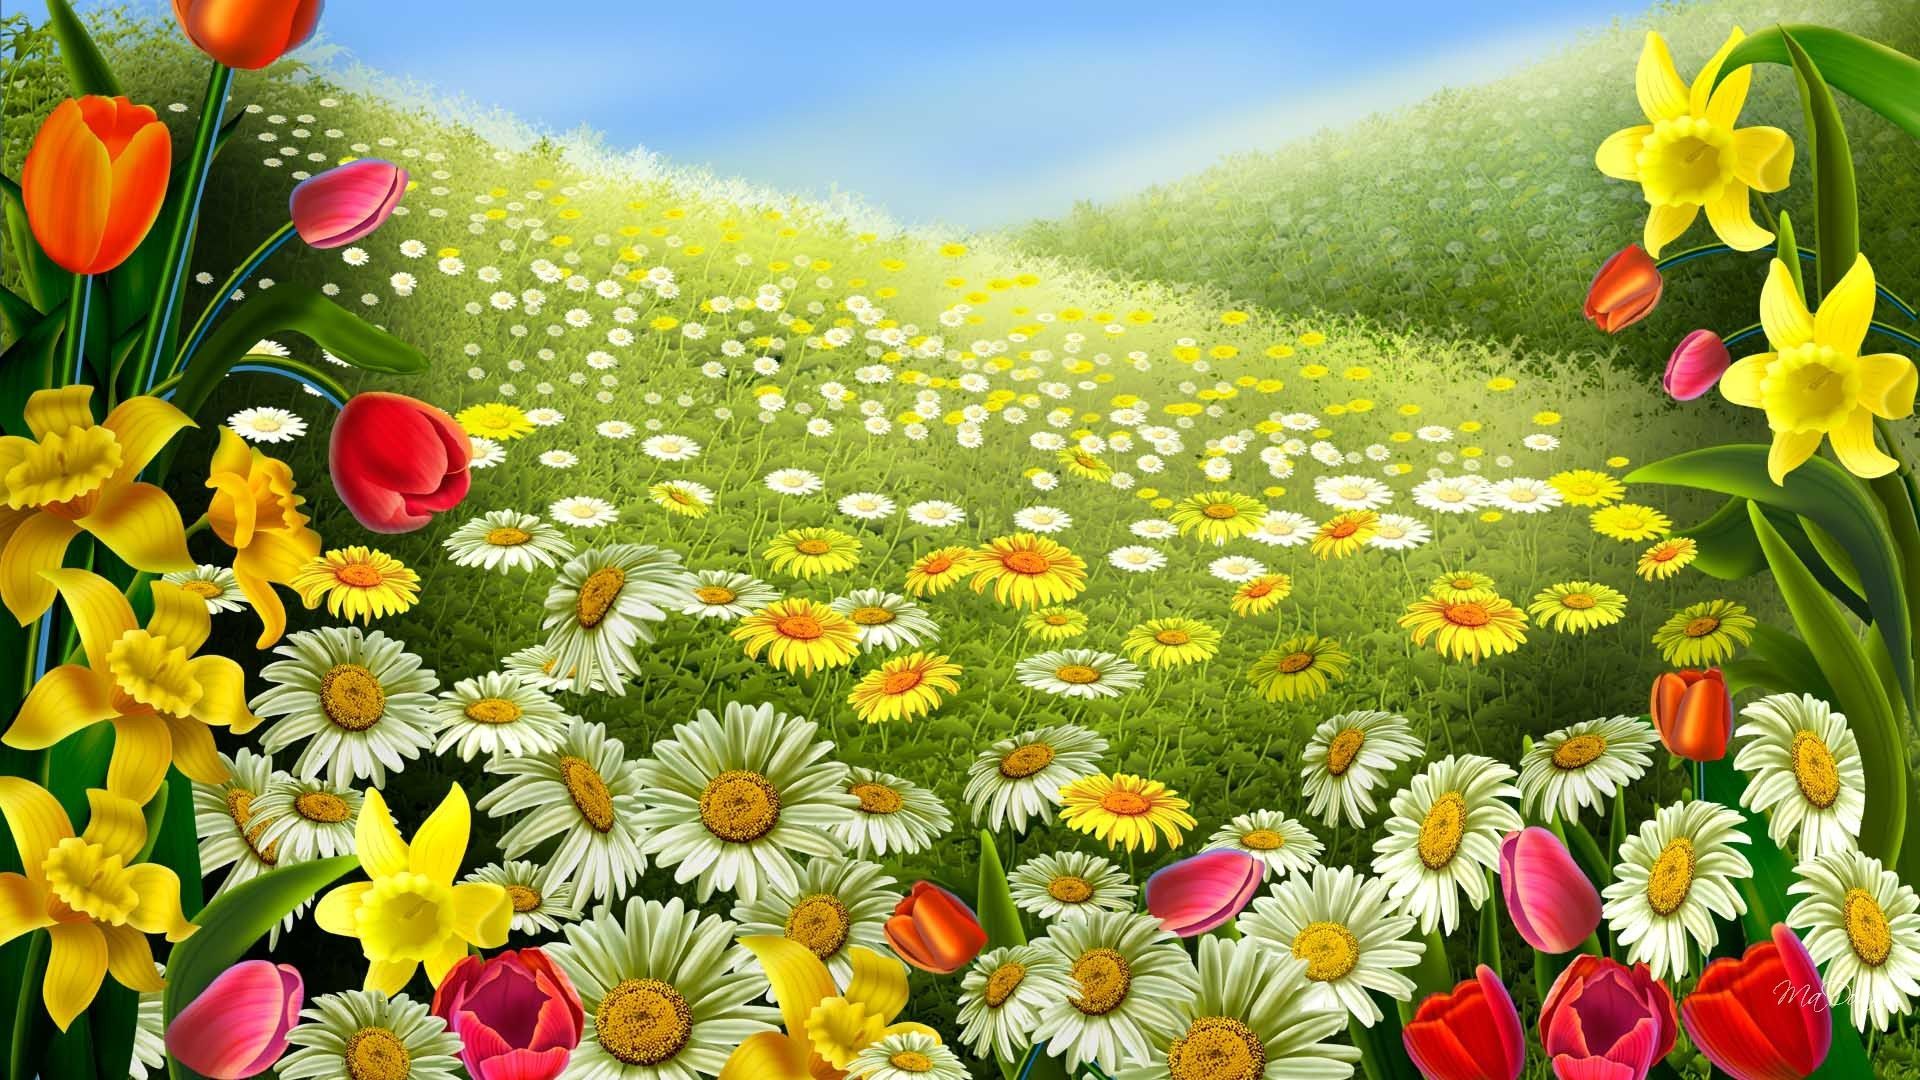 Spring wallpapers HD free download | Wallpapers, Backgrounds ...